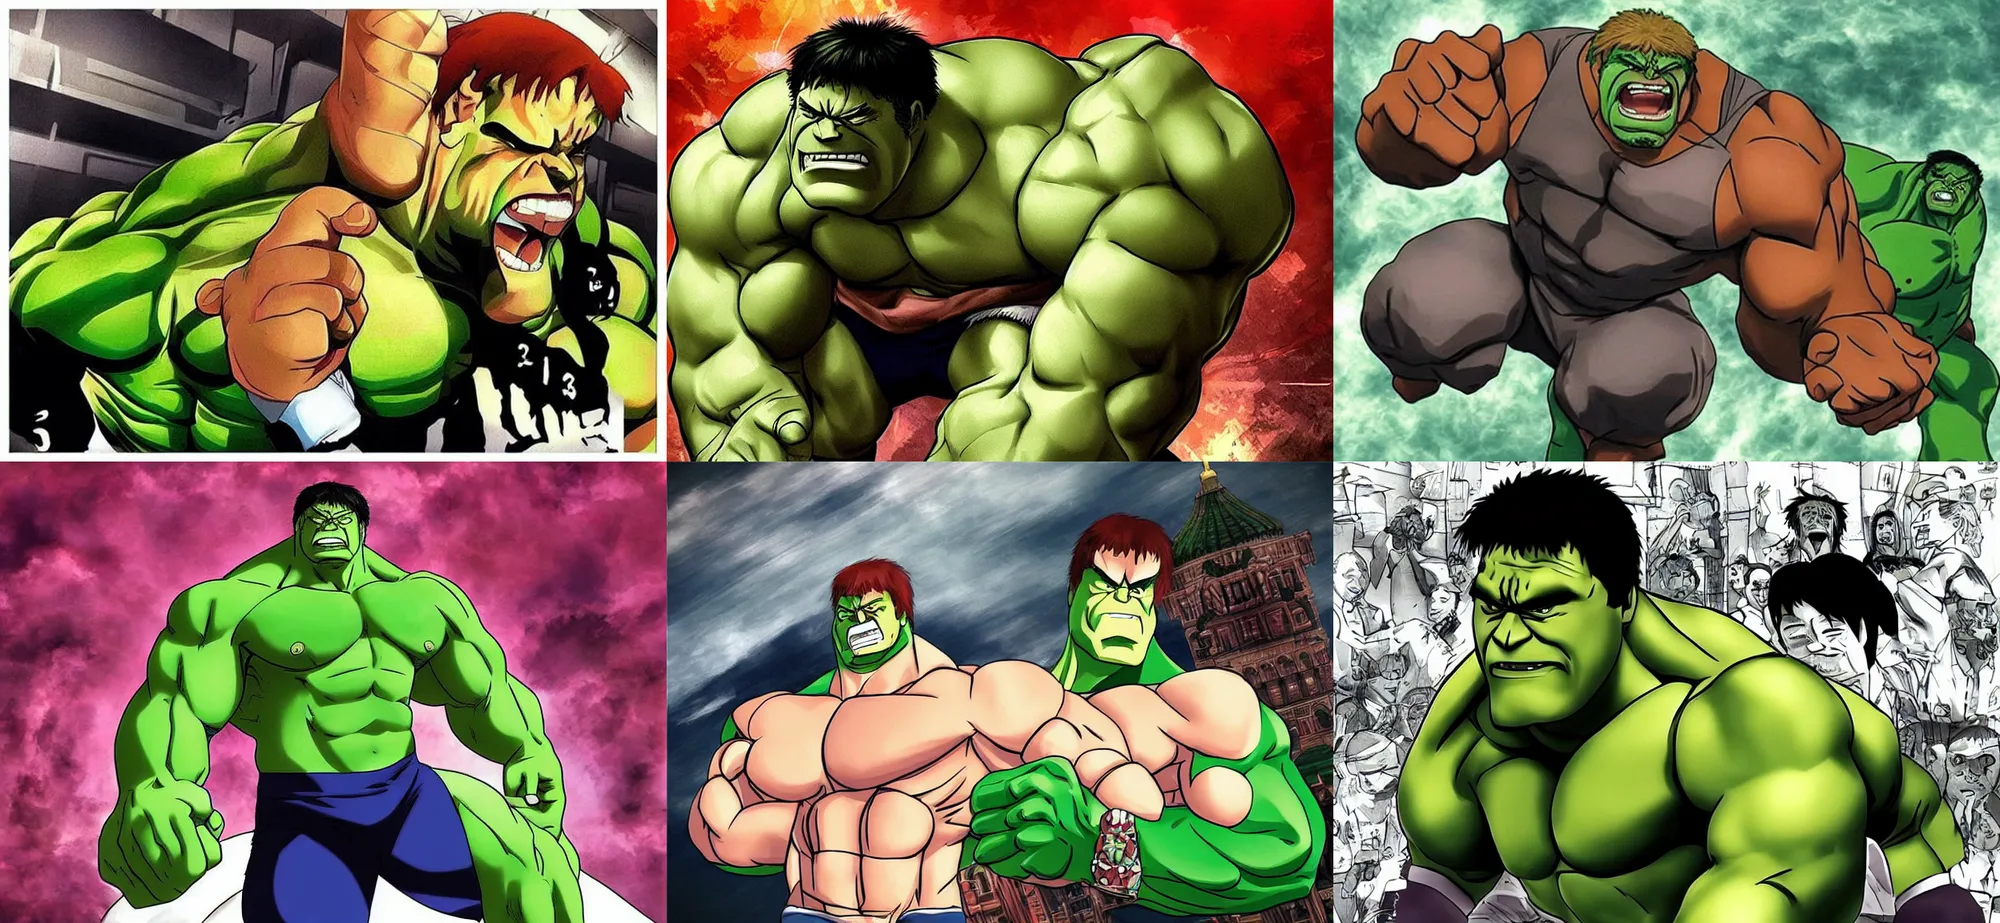 Prompt: “Putin in the form of Hulk in anime cartoon style”